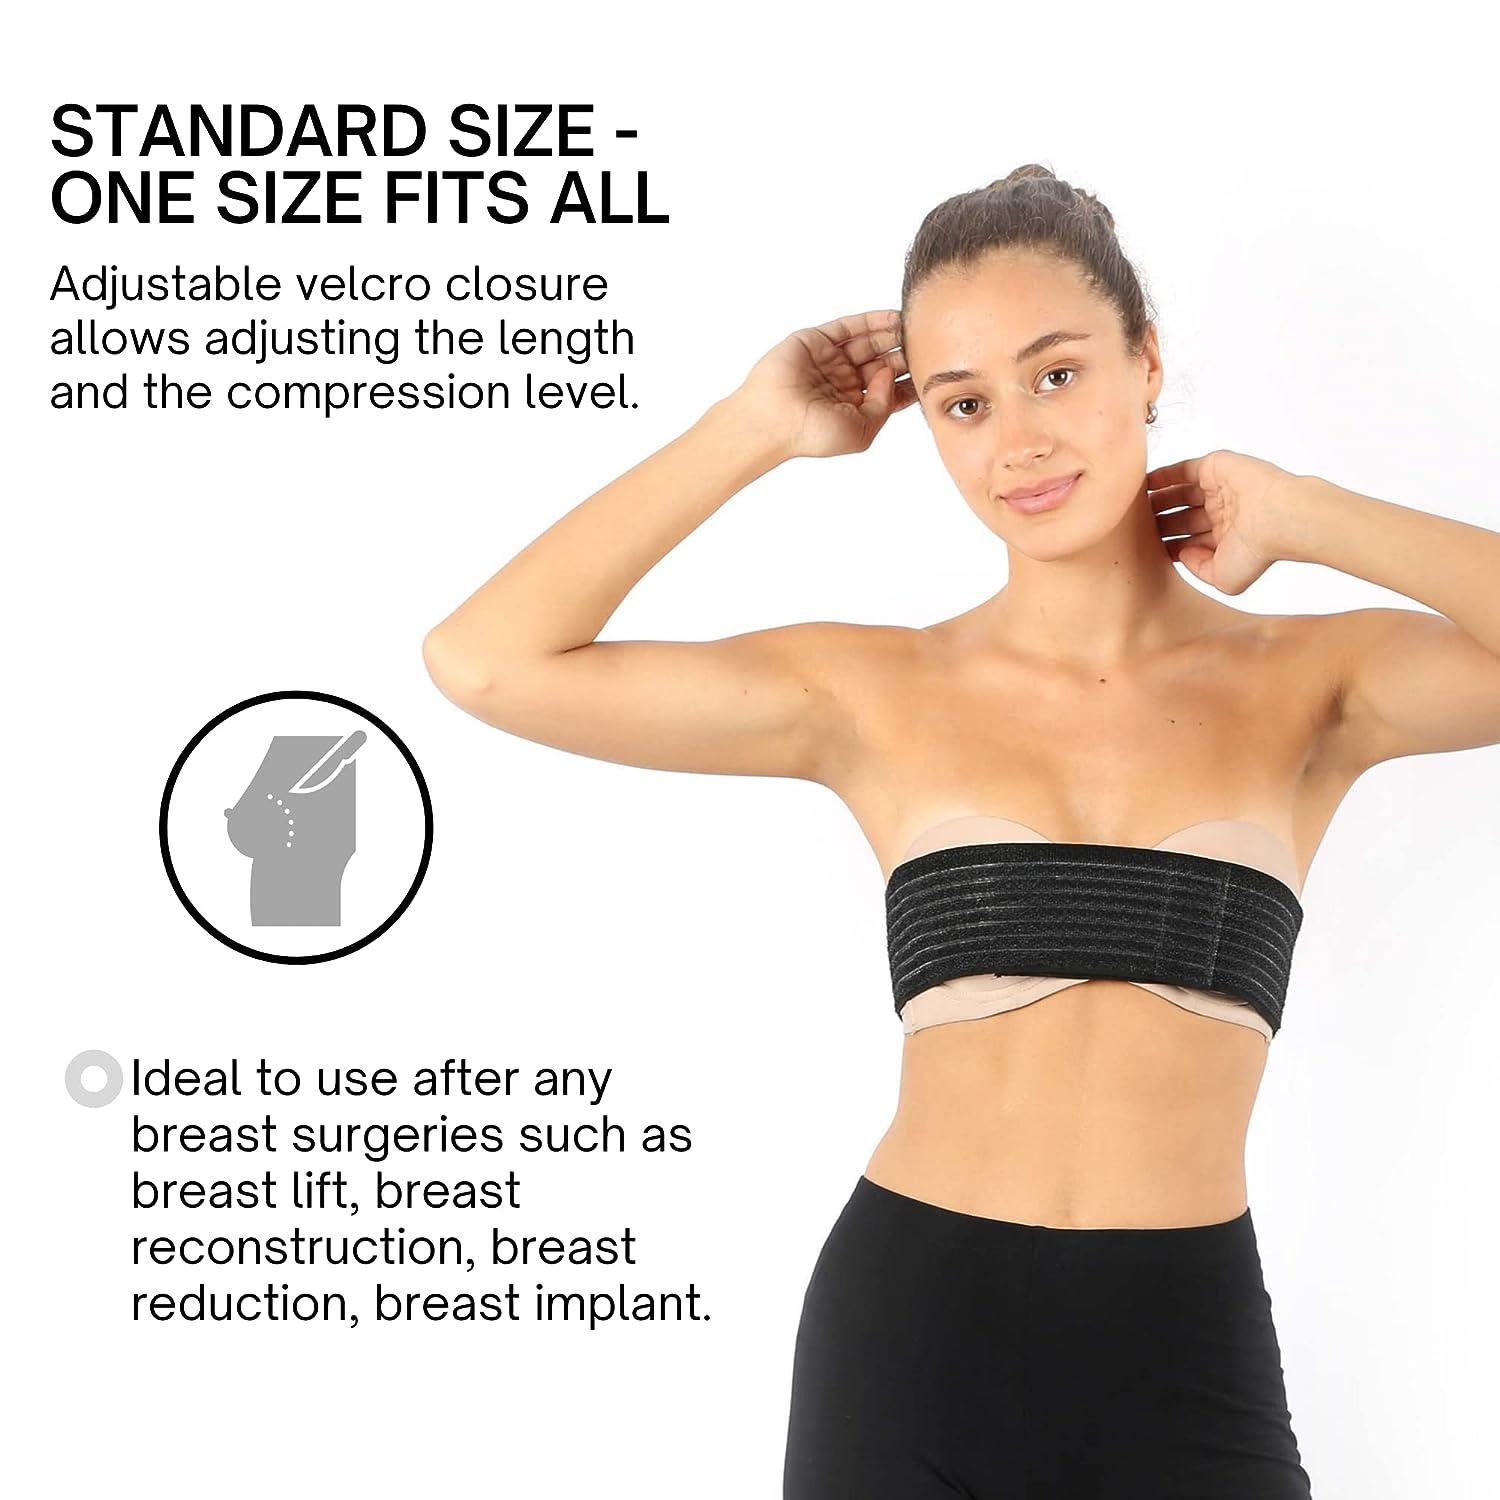 Breast Implant Stabilizer Band, Post Surgery Compression Support